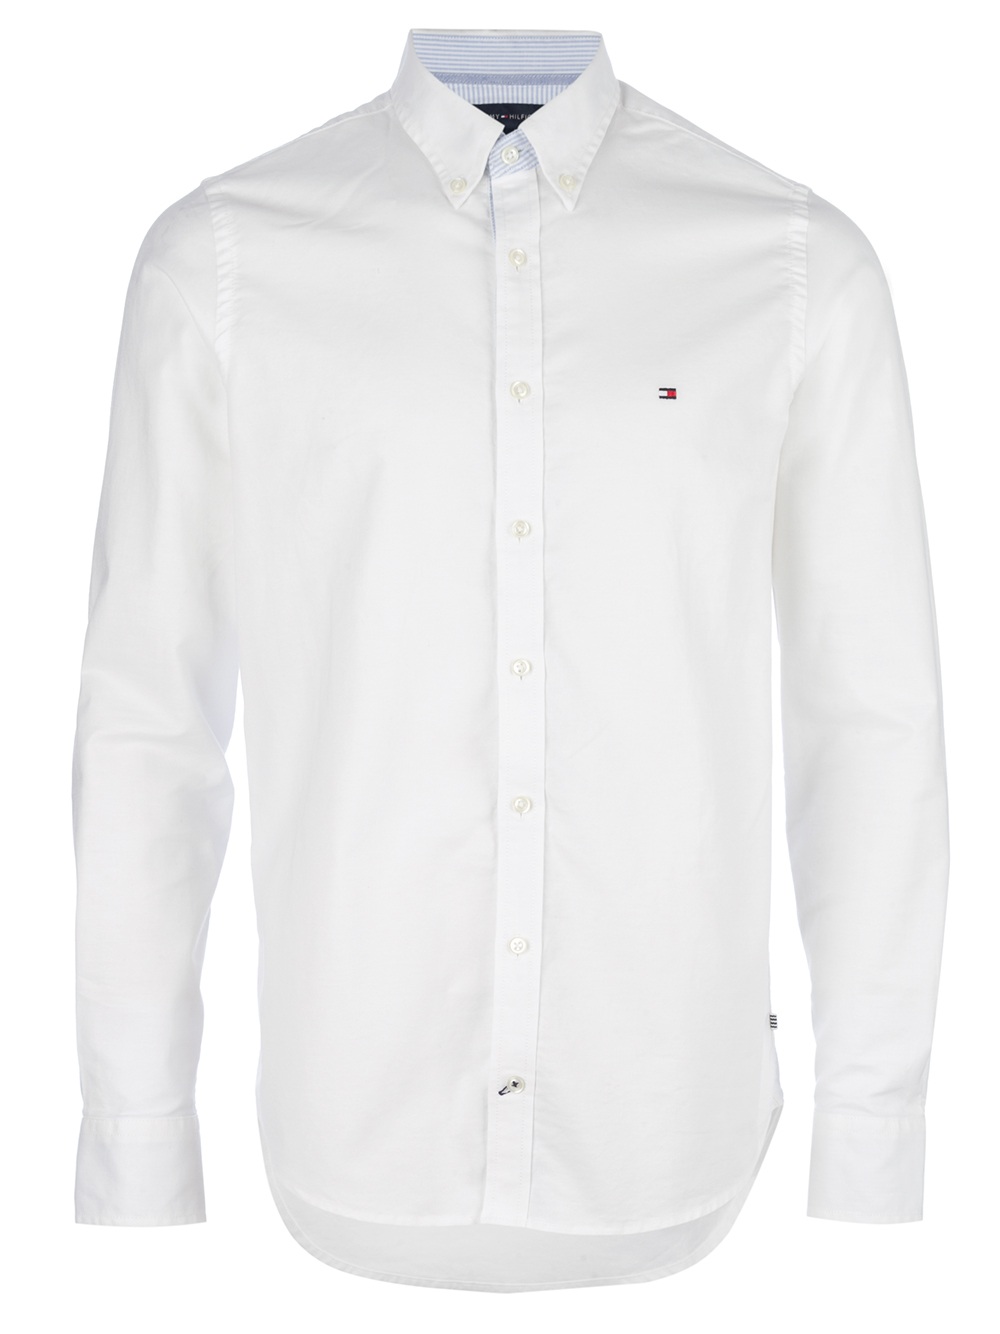 Lyst - Tommy hilfiger Button Down Shirt in White for Men